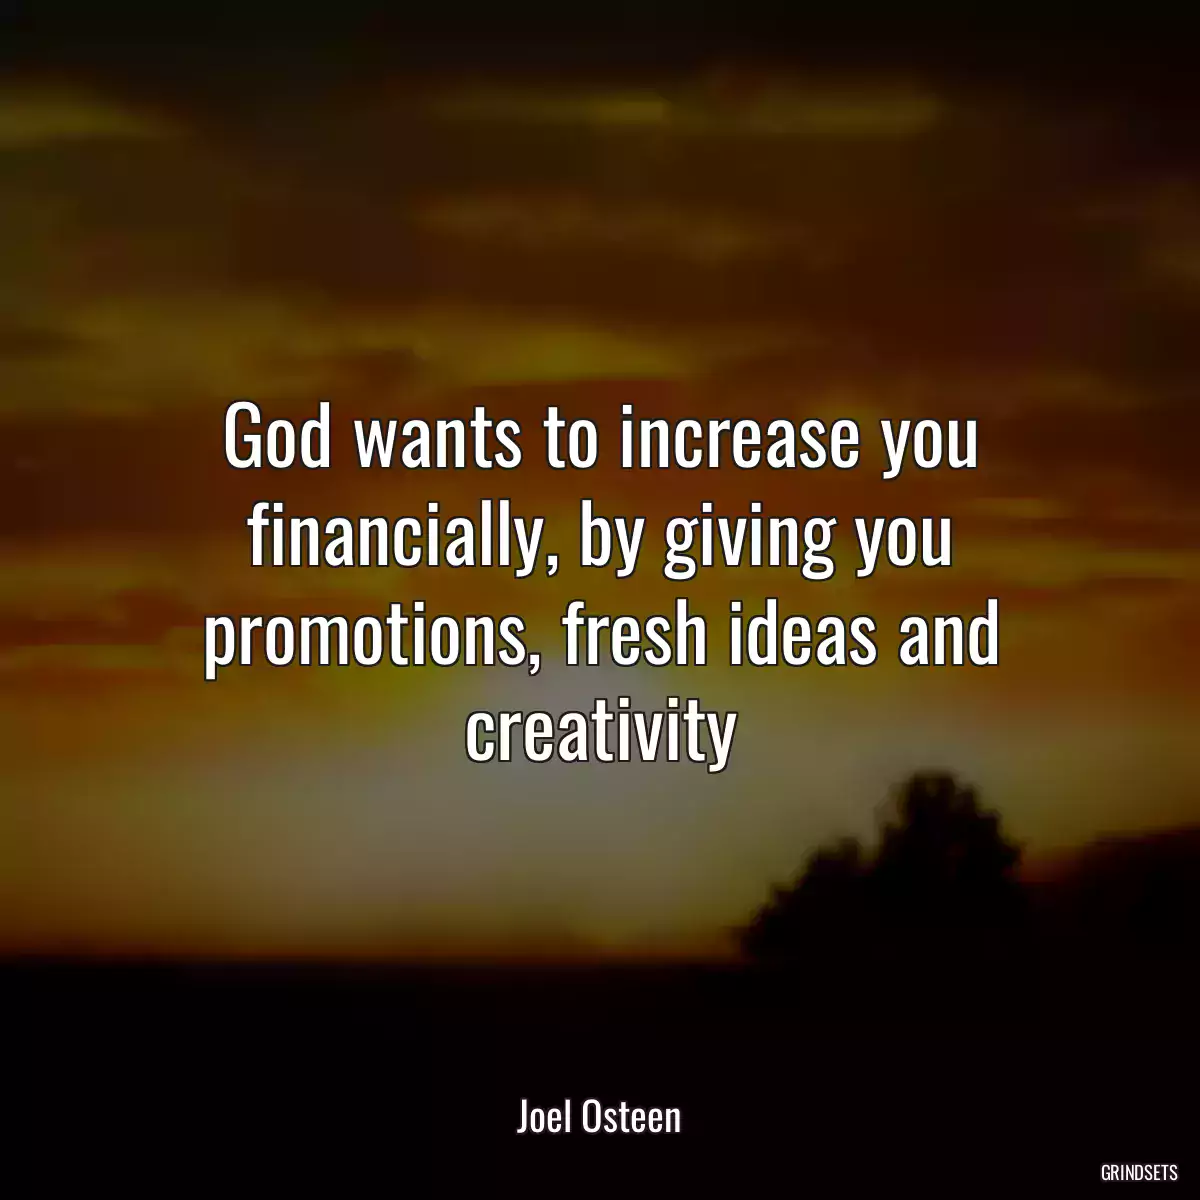 God wants to increase you financially, by giving you promotions, fresh ideas and creativity